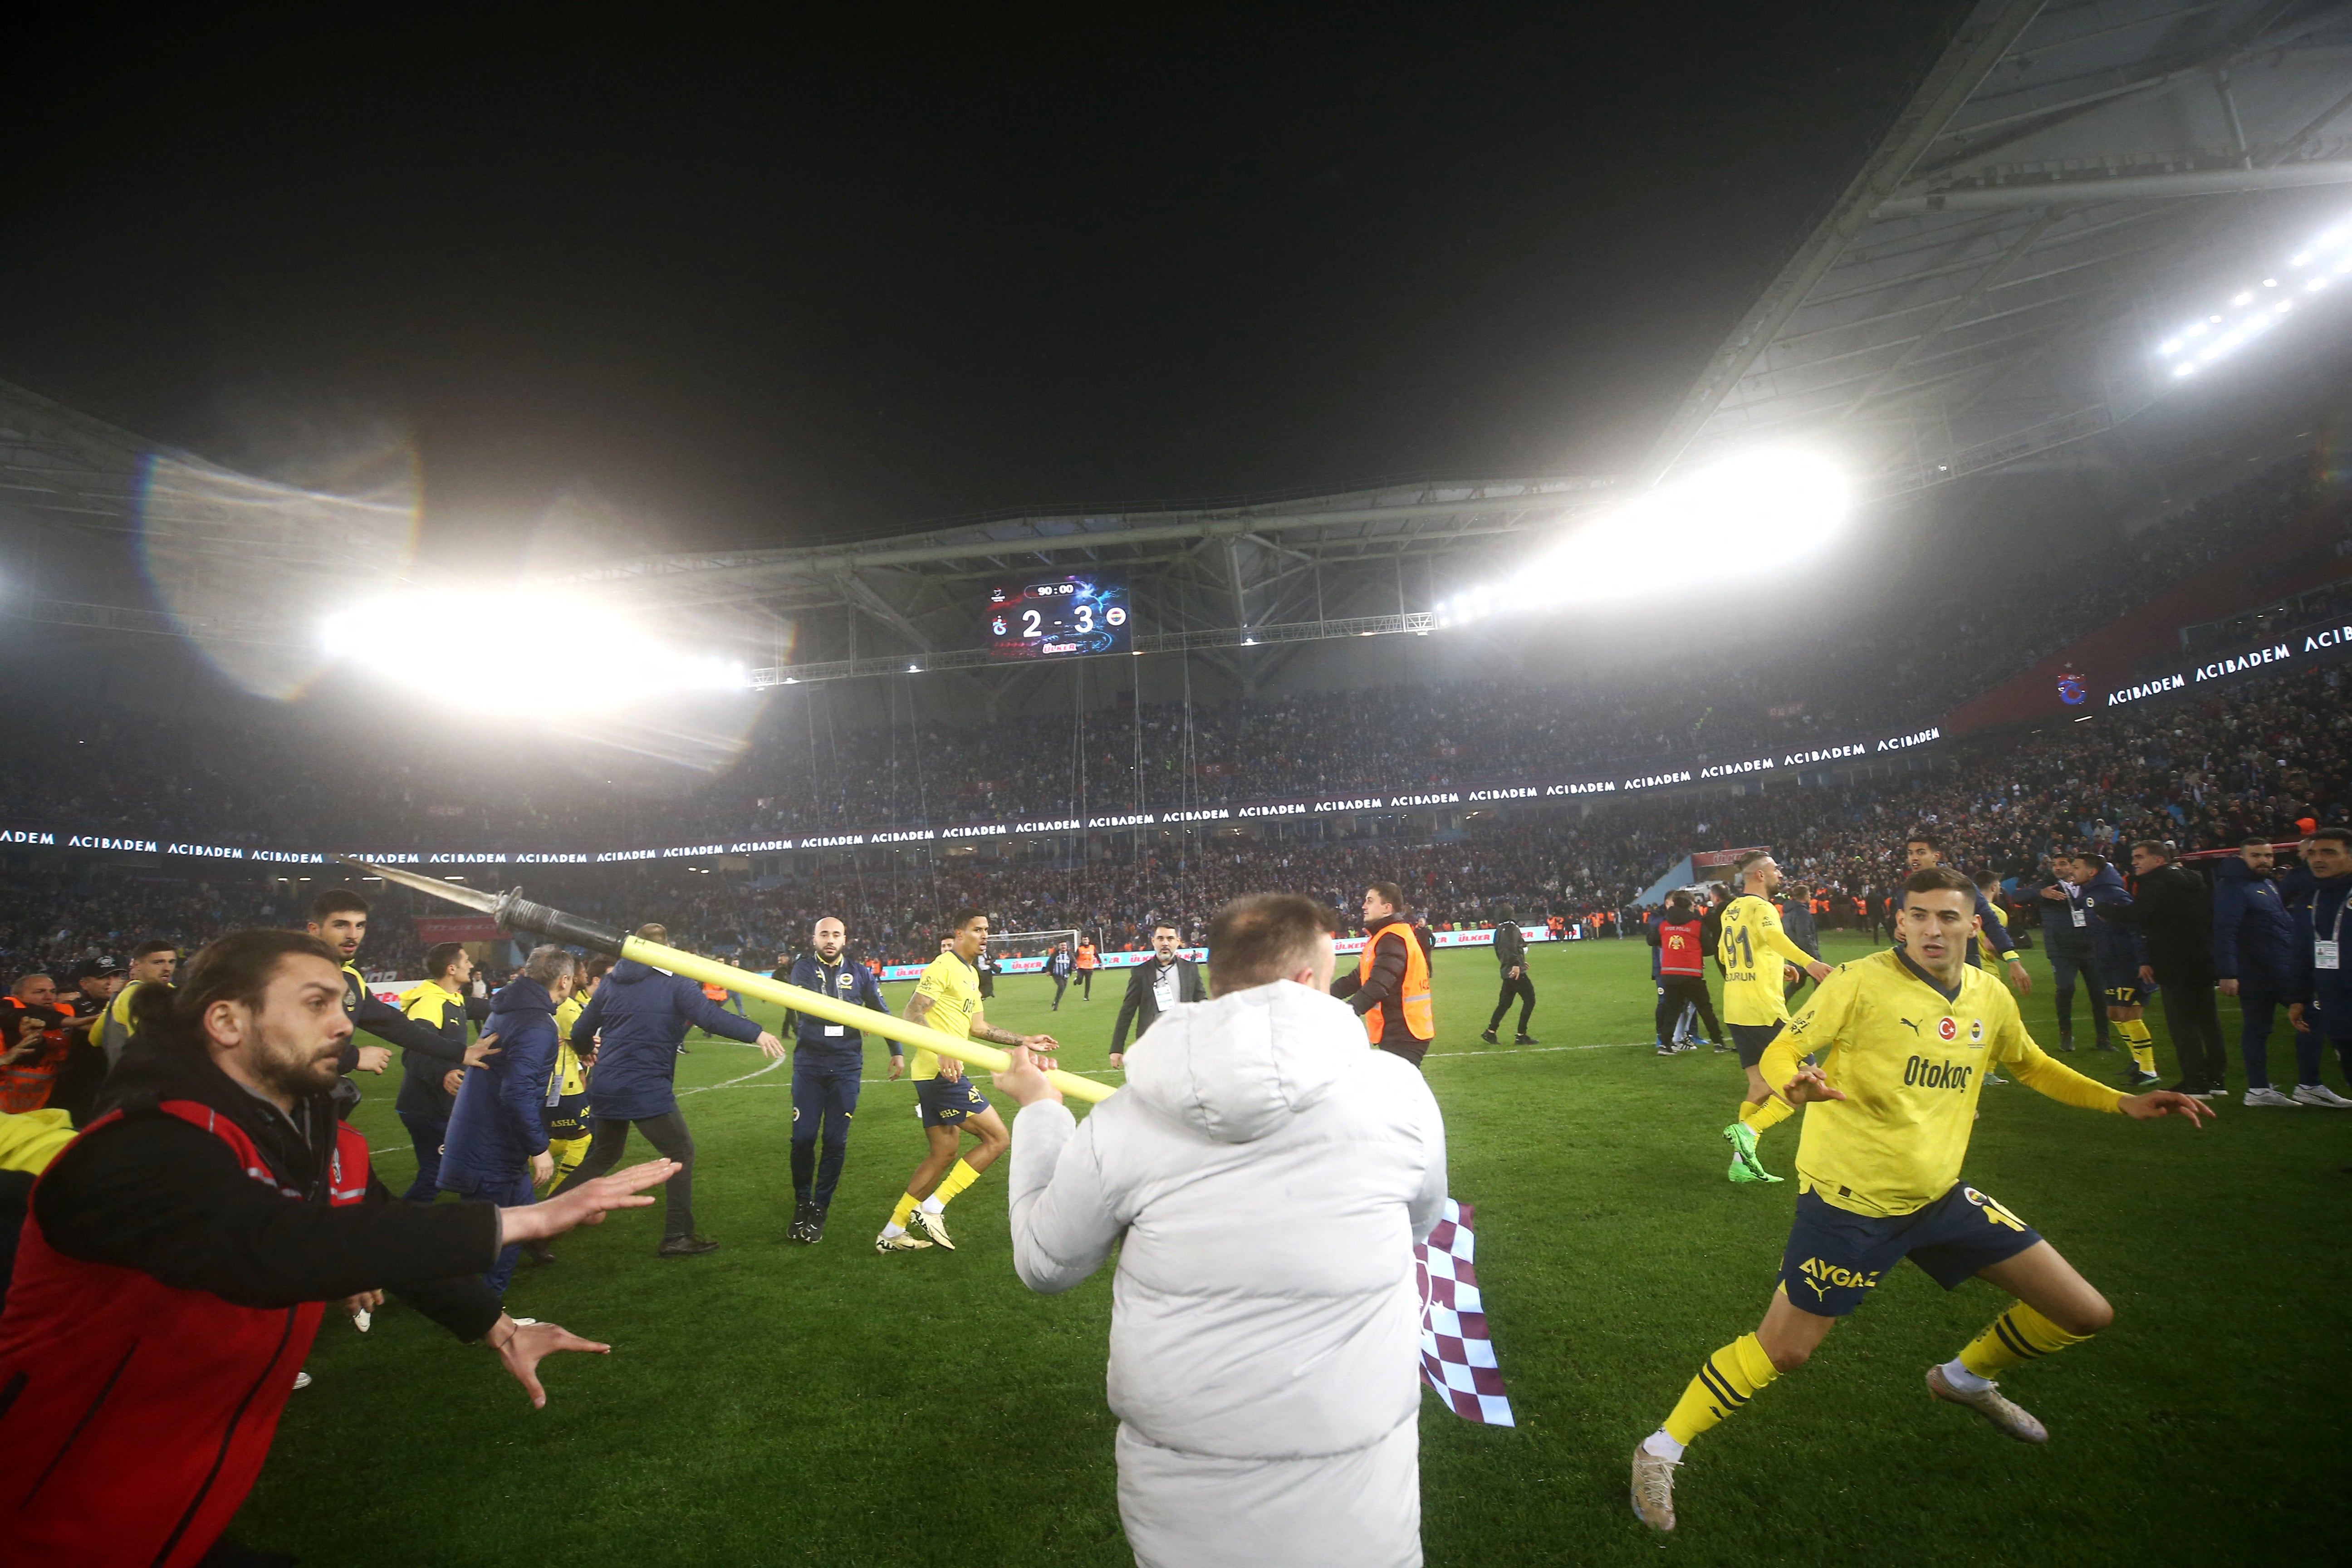 Fenerbahce’s players are attacked by Trabzonspor supporters after the Turkey Super Lig match